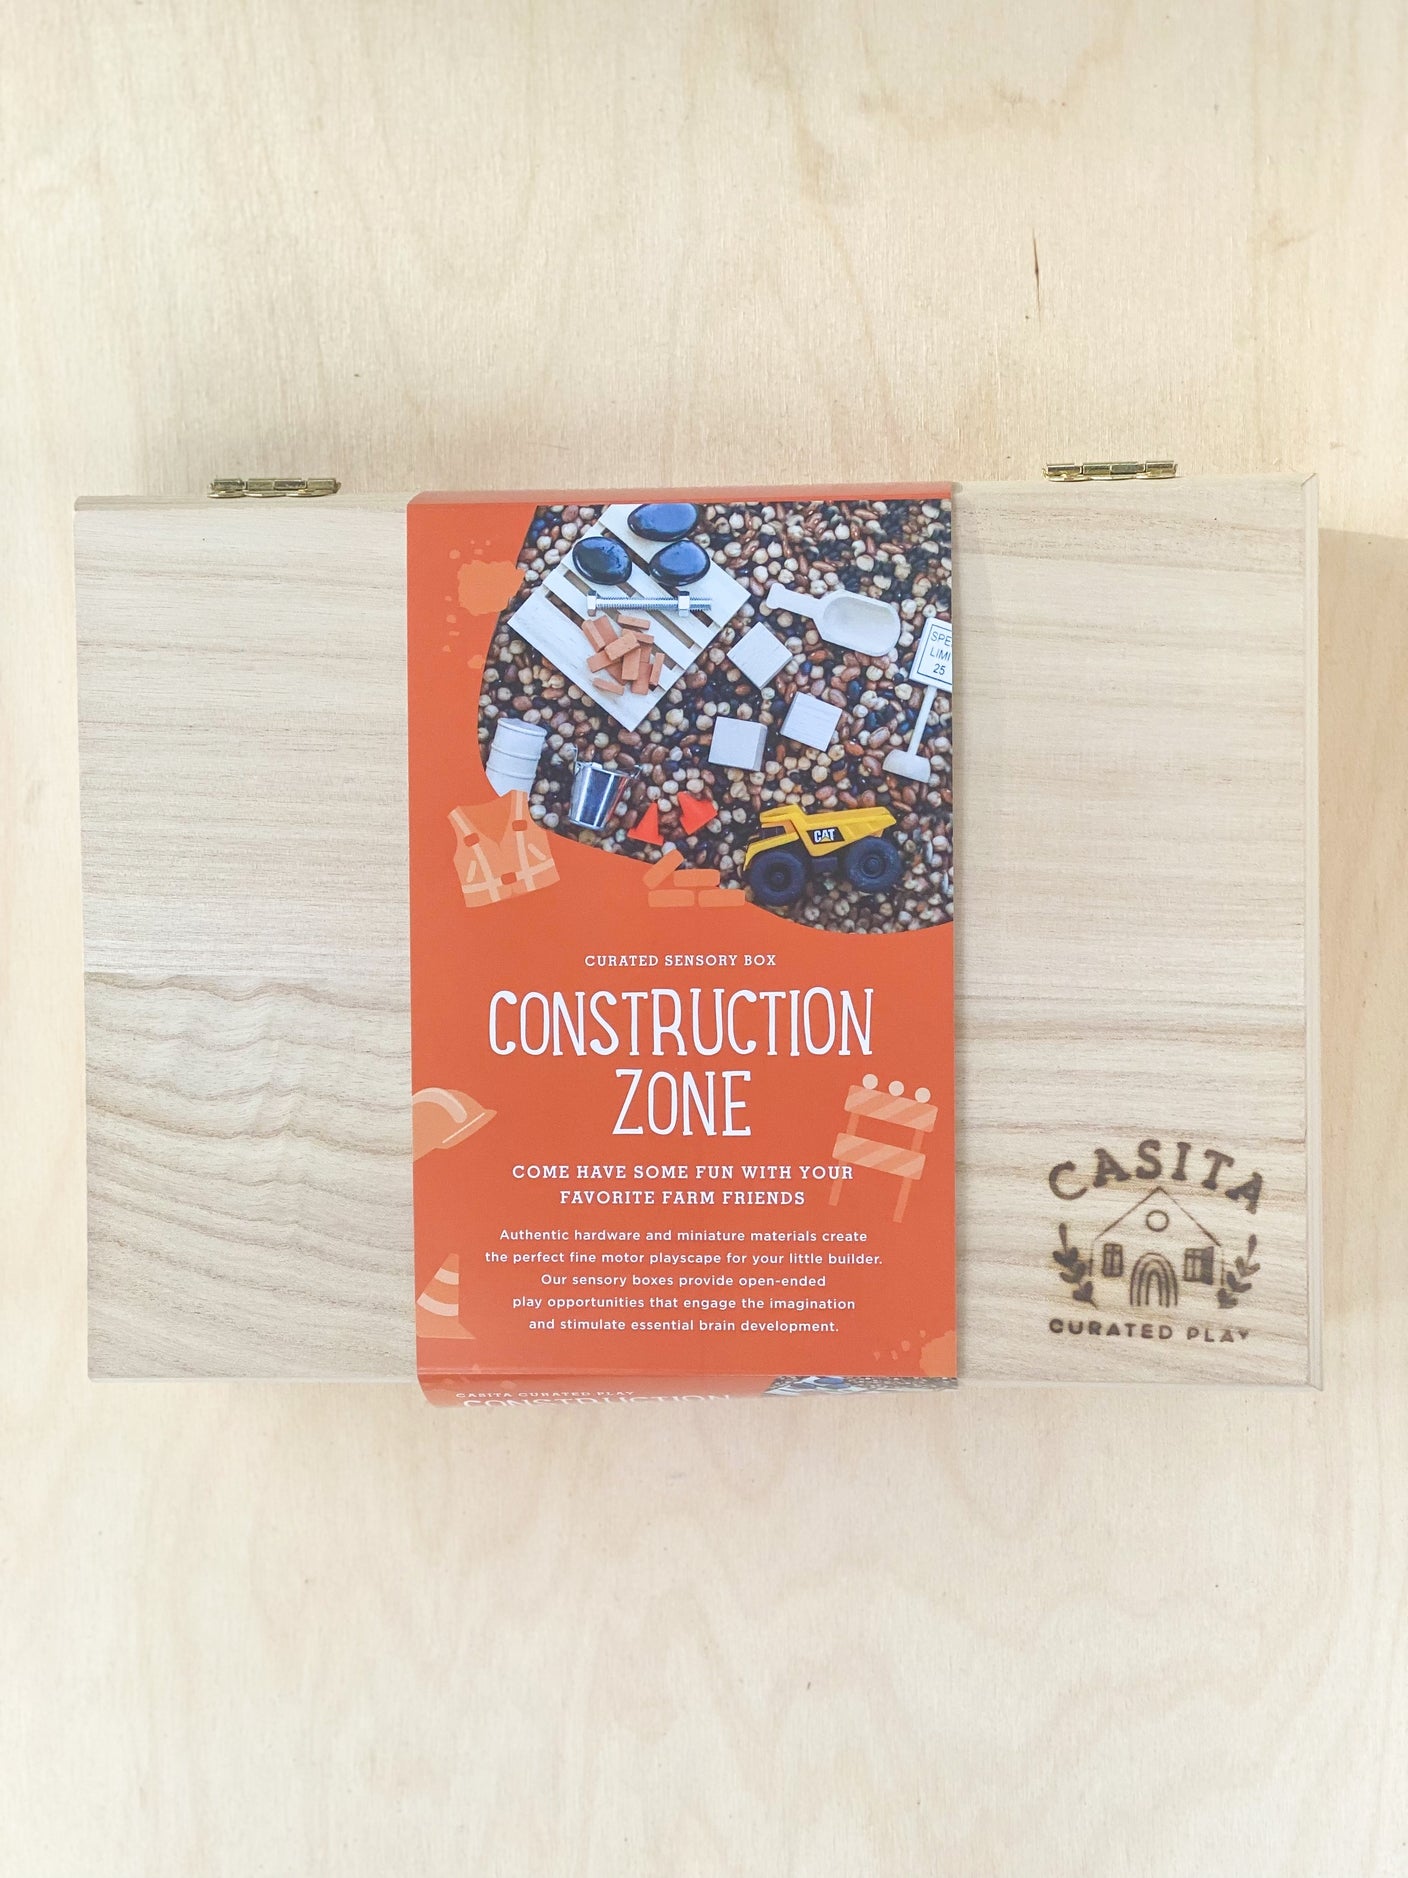 casita curated play / The Construction Zone Sensory Kit is packed with all the building materials to construct the scene of your dreams! Includes one vehicle, large wooden pallet, miniature clay bricks, wooden blocks, wooden sign, wooden barrel, cones, & metal pail. An authentic nut & bolt are provided for the ultimate fine motor practice! 